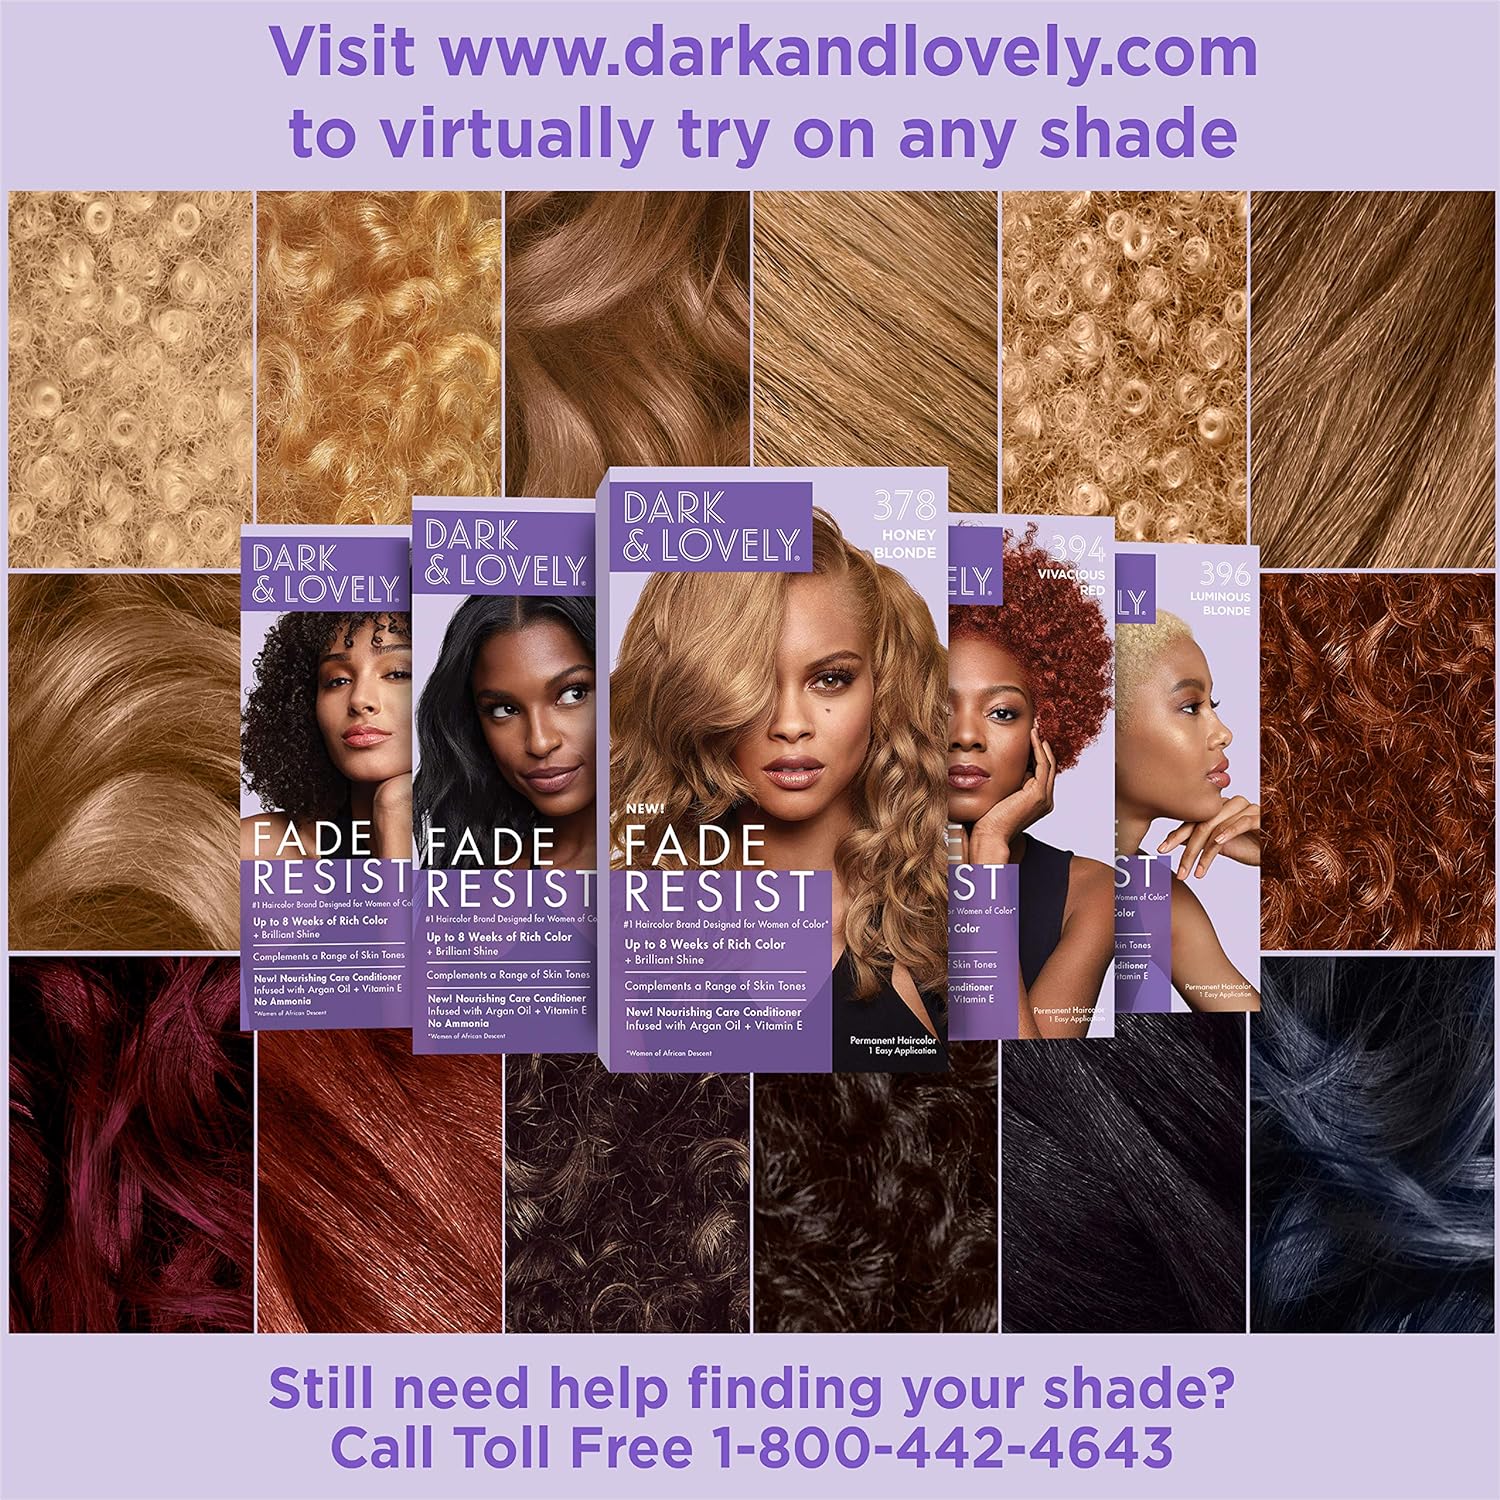 SoftSheen-Carson Dark and Lovely Fade Resist Rich Conditioning Hair Color, Permanent Hair Color, Up To 100 percent Gray Coverage, Brilliant Shine with Argan Oil and Vitamin E, Midnight Blue : Chemical Hair Dyes : Beauty & Personal Care